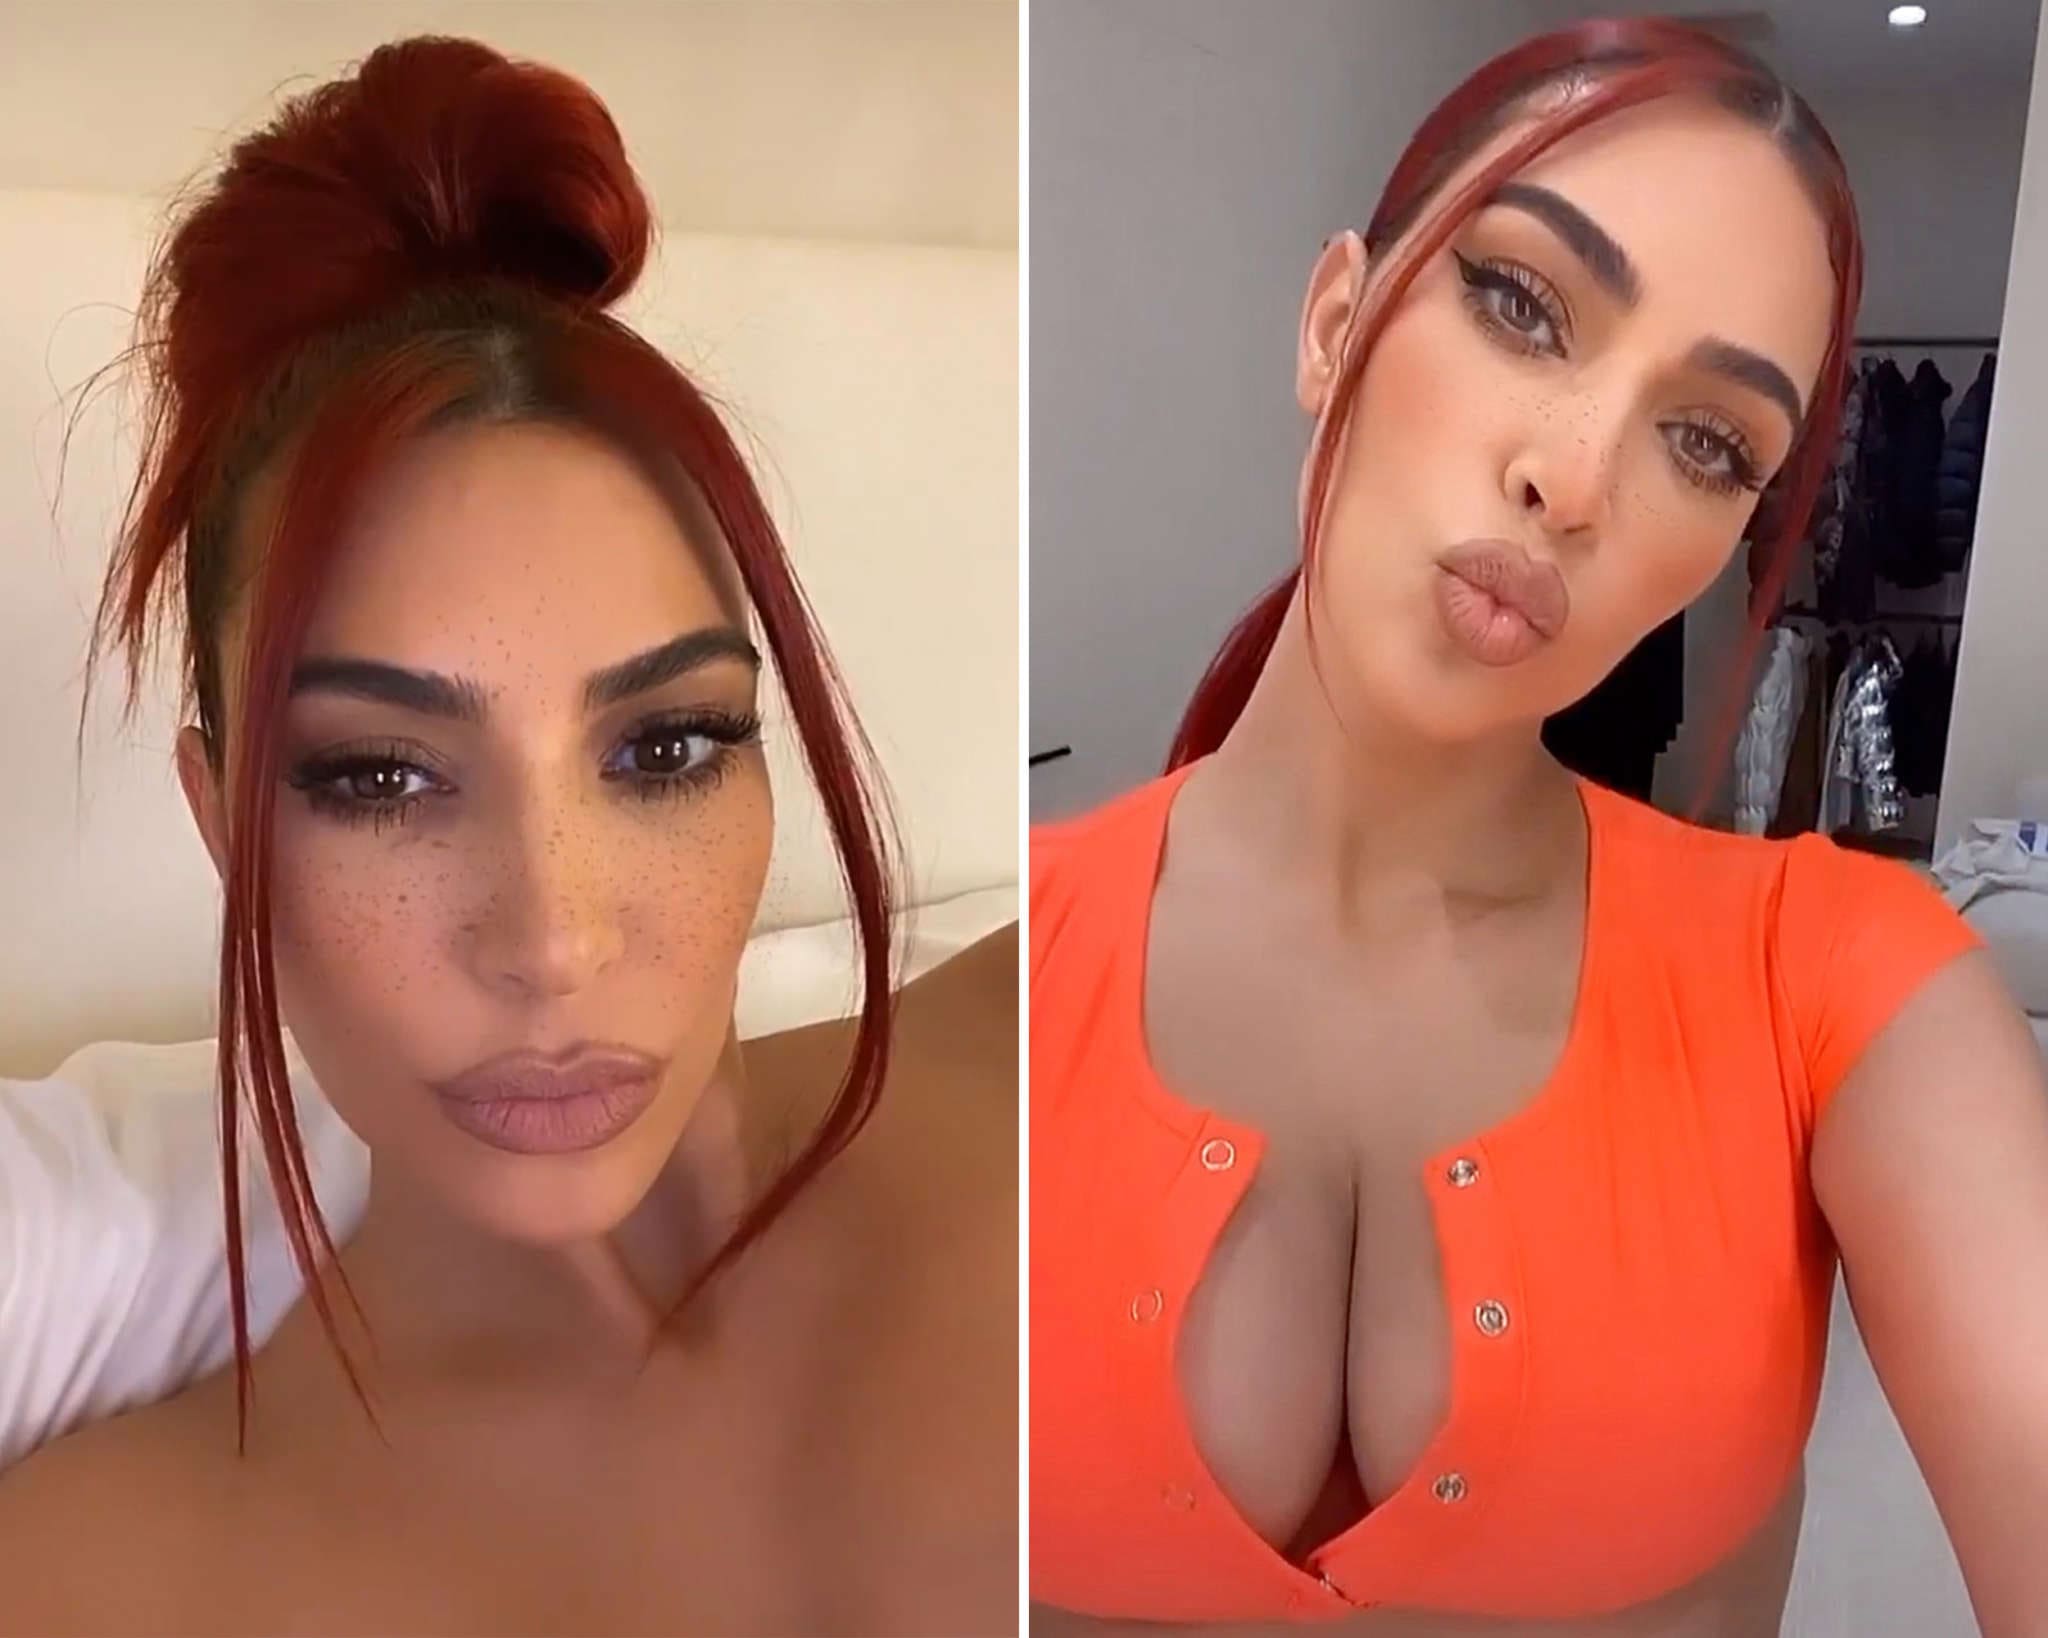 ”kim-kardashian-debuts-fiery-red-hair-leaving-fans-in-awe-she-also-sparks-cosmetic-surgery-rumors”